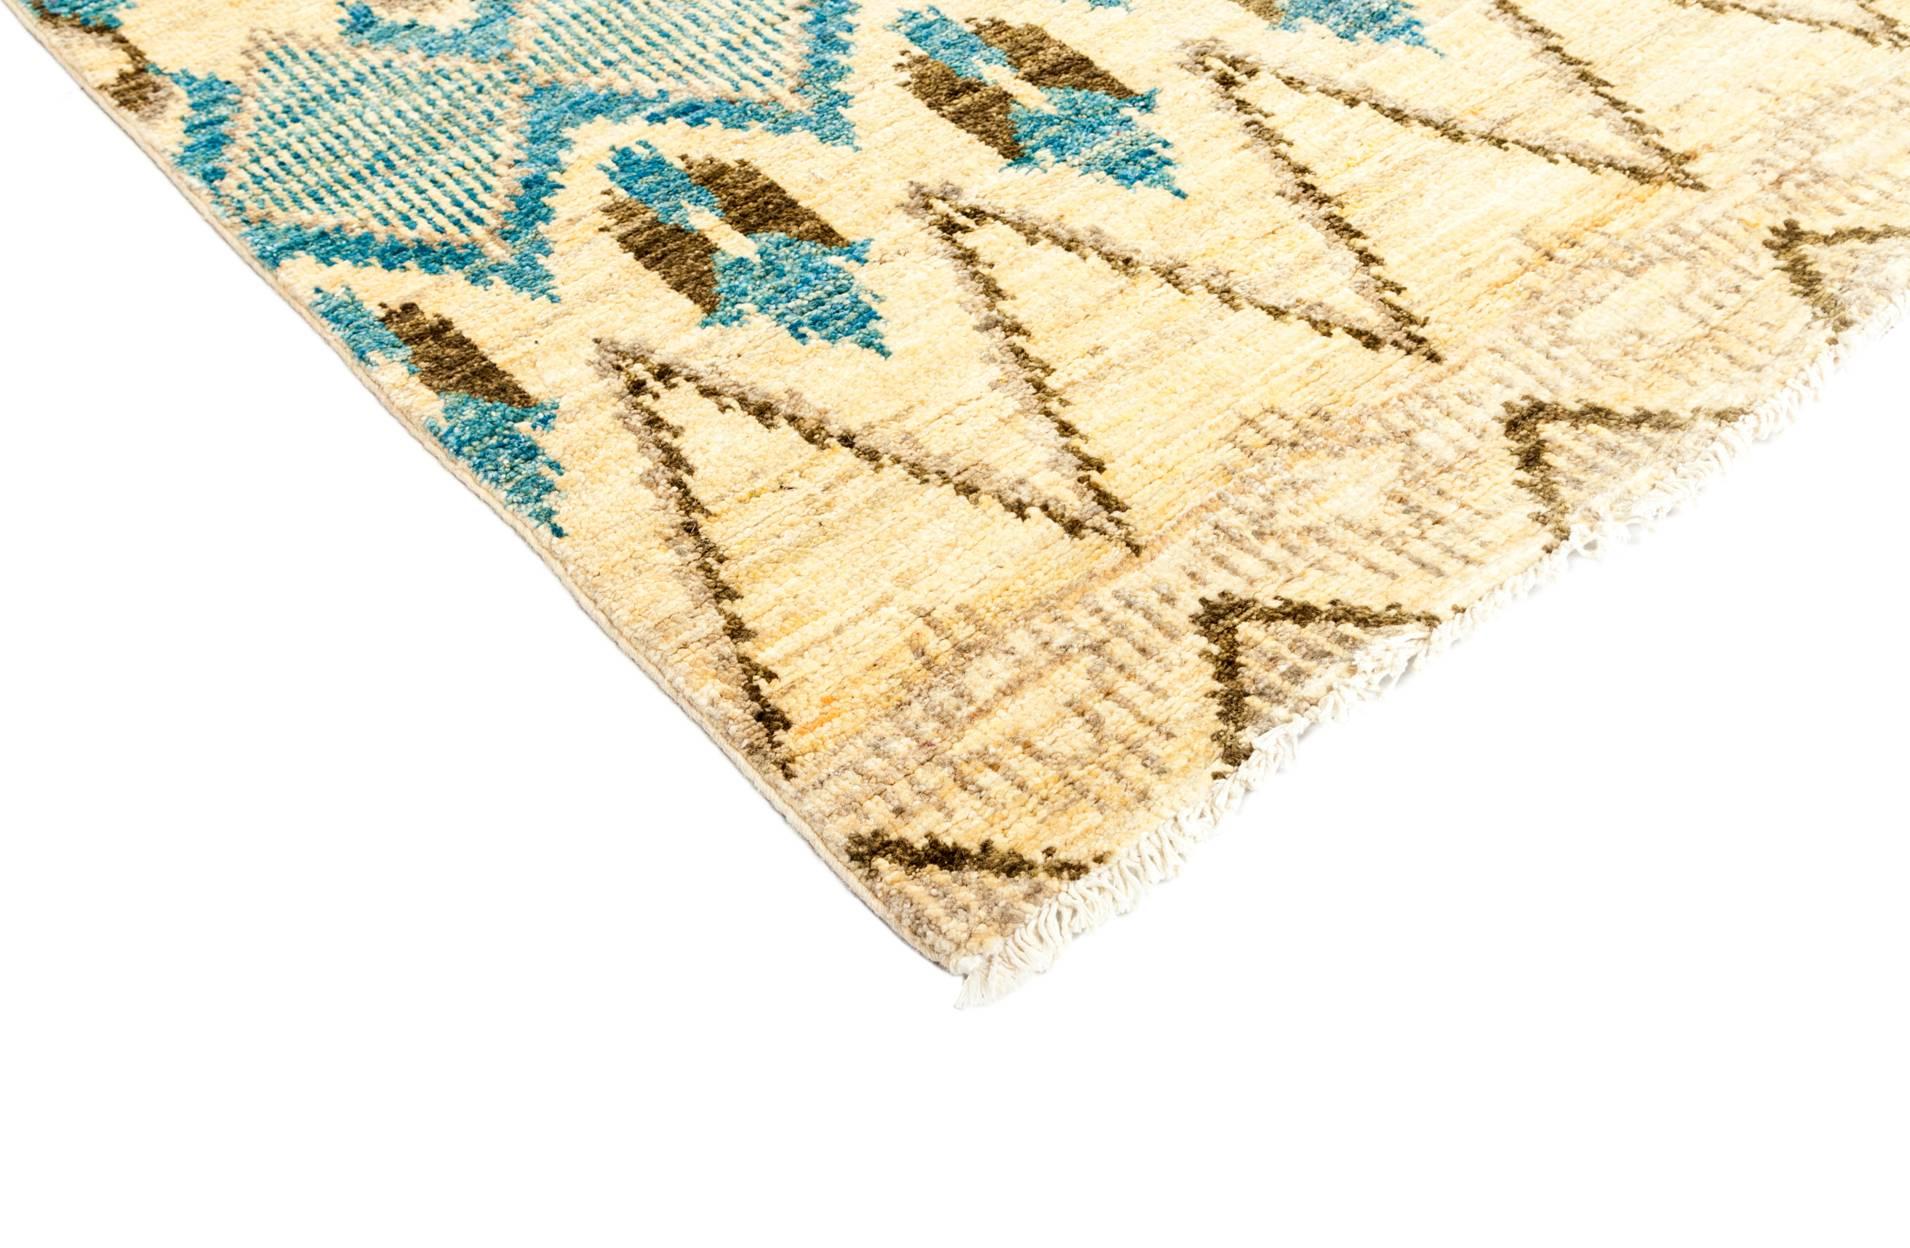 At once classic and modern, this rug is inspired by central Asian and Uzbek silk Ikats and reimagined in vivid colors. Hand-knotted and vegetable-dyed, the wool rug is designed to refresh a room for generations to come.